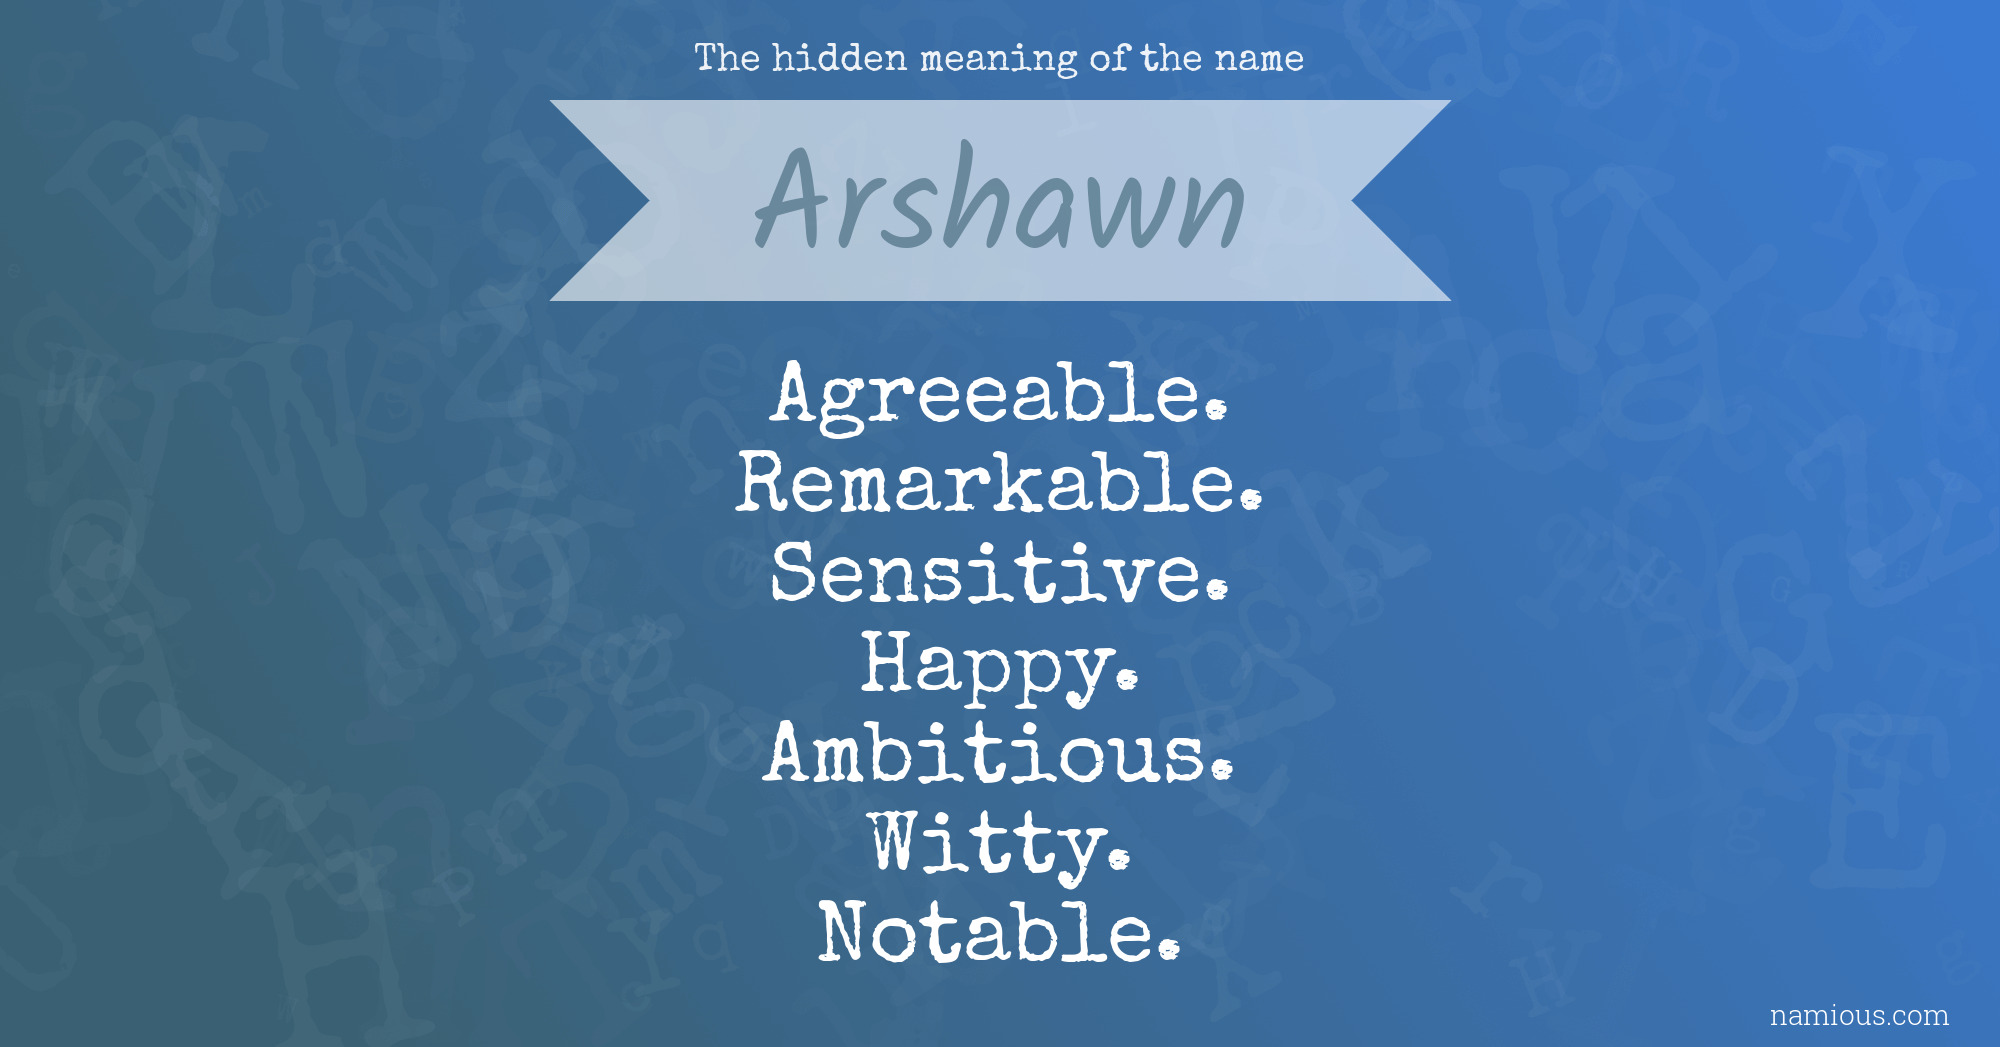 The hidden meaning of the name Arshawn